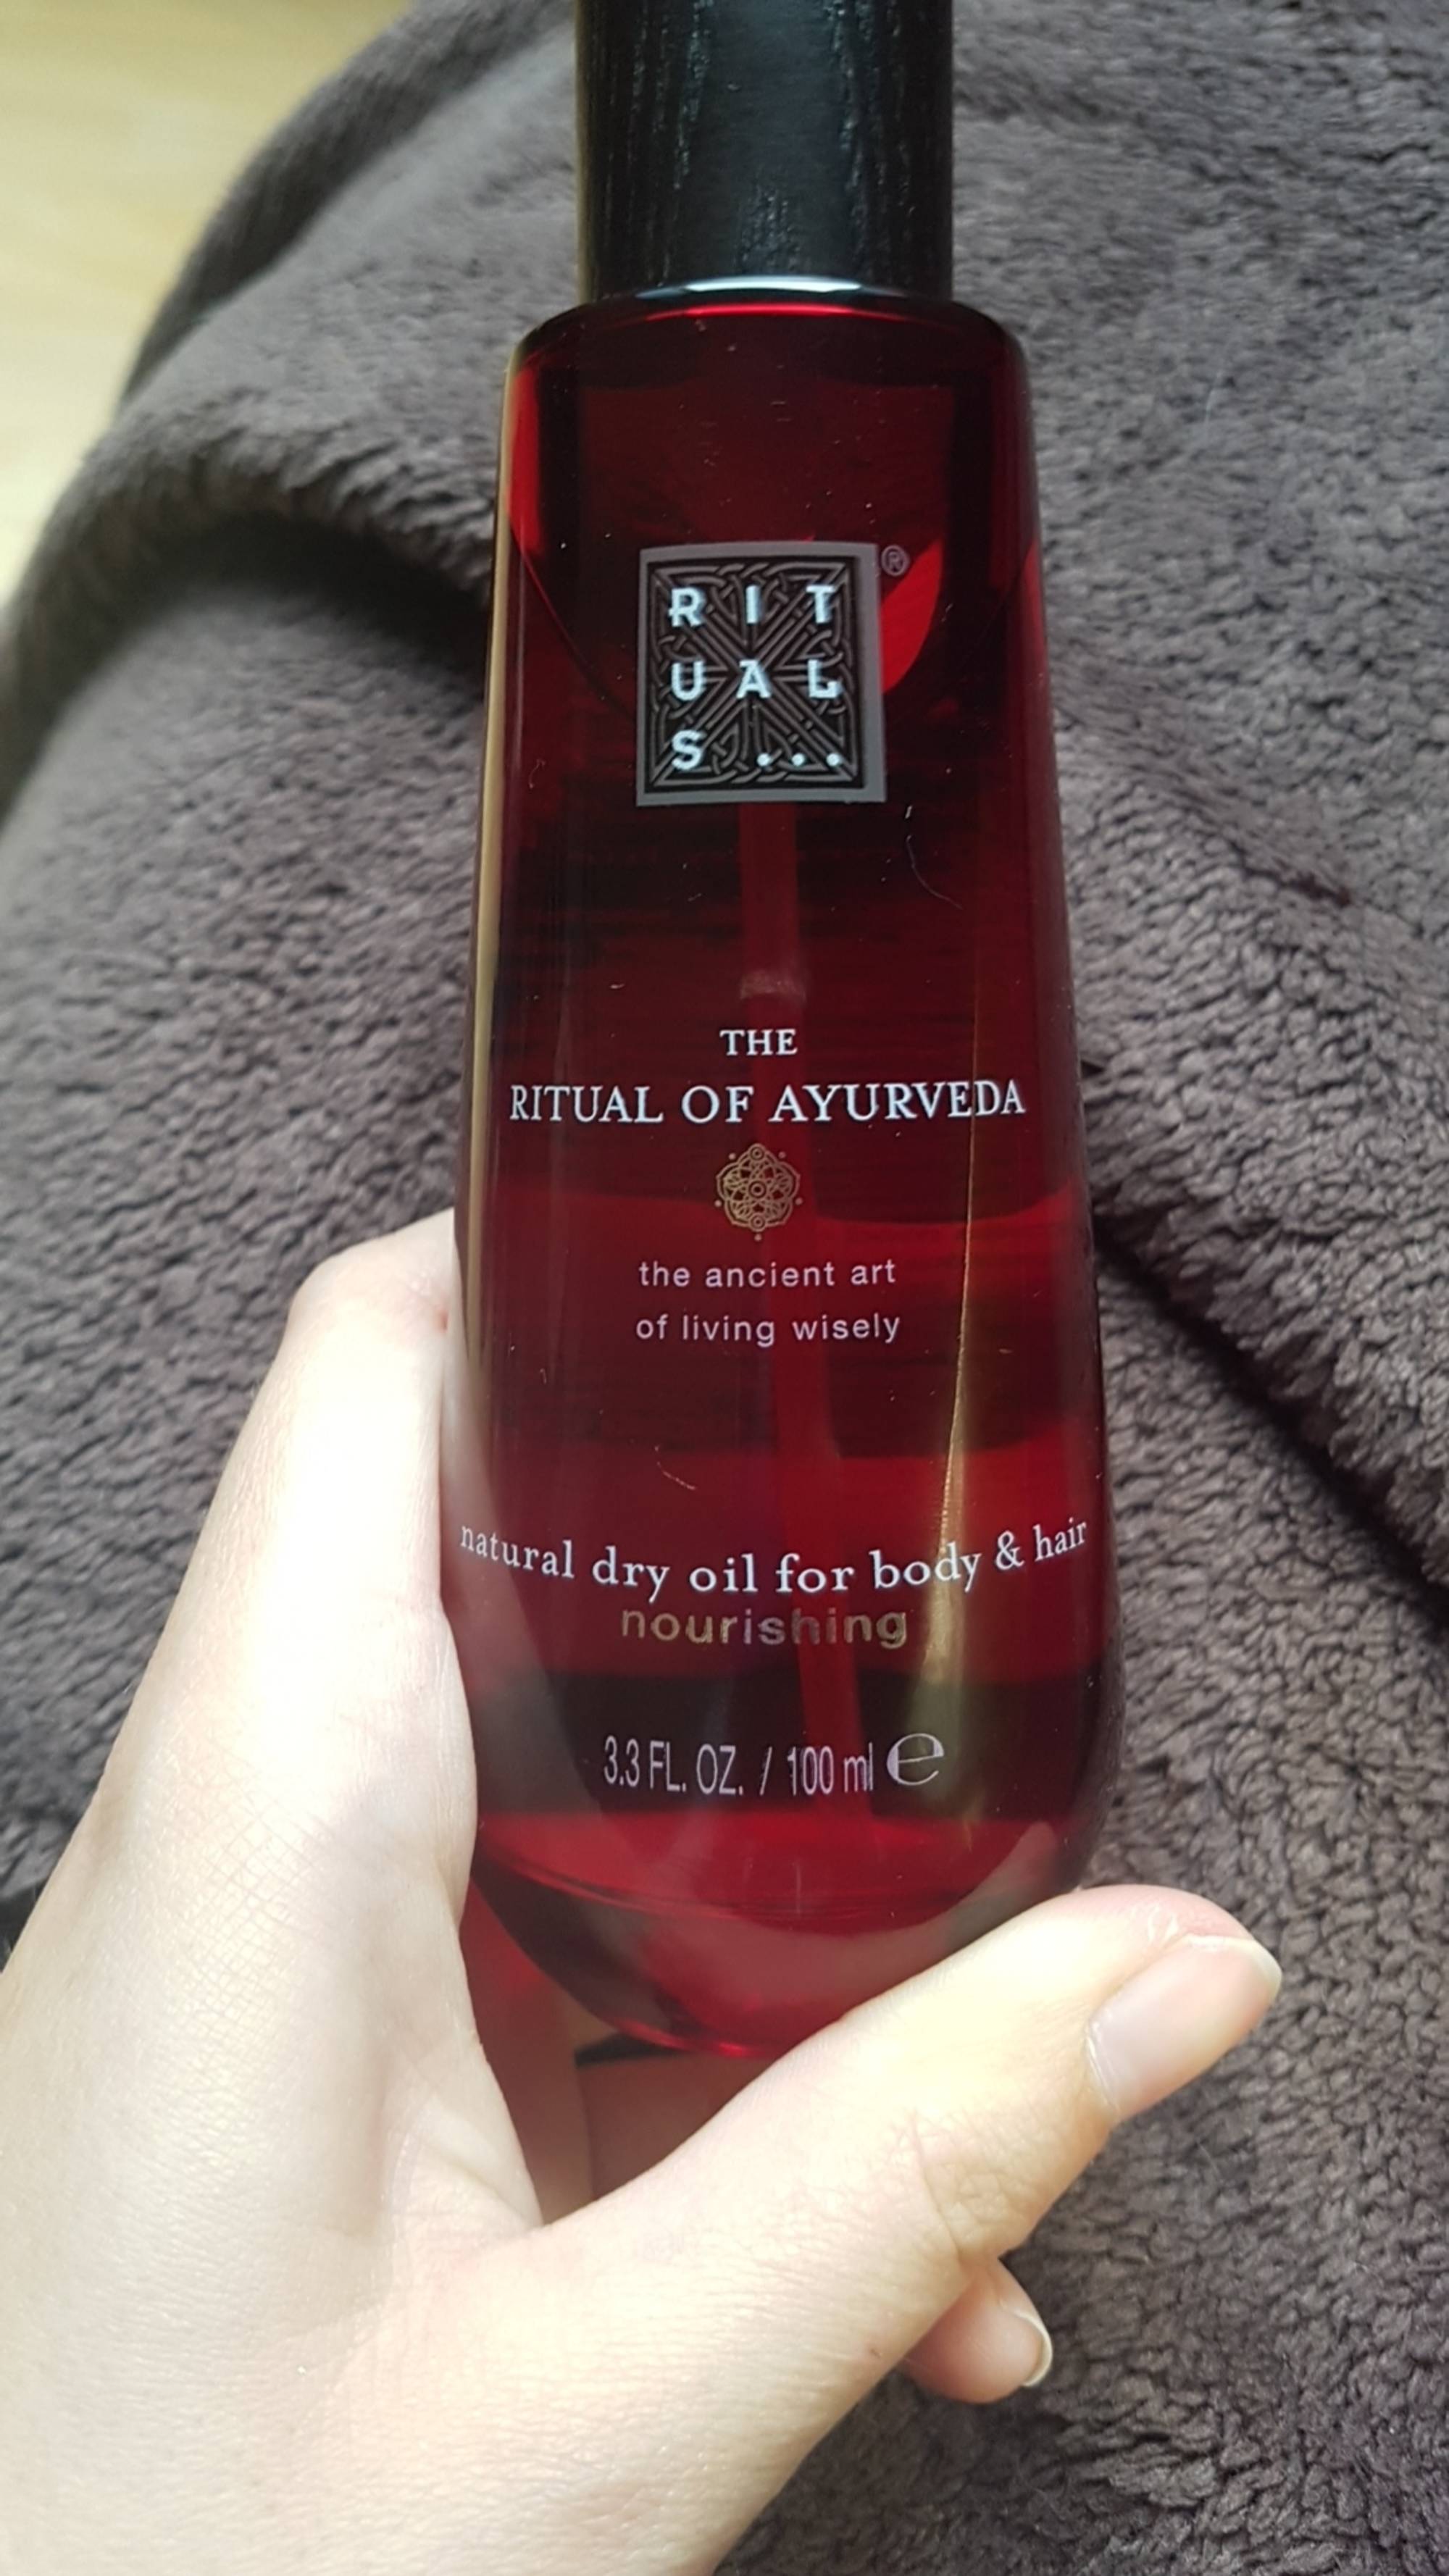 RITUALS - The Ritual of ayurveda - Natural dry oil for body & hair